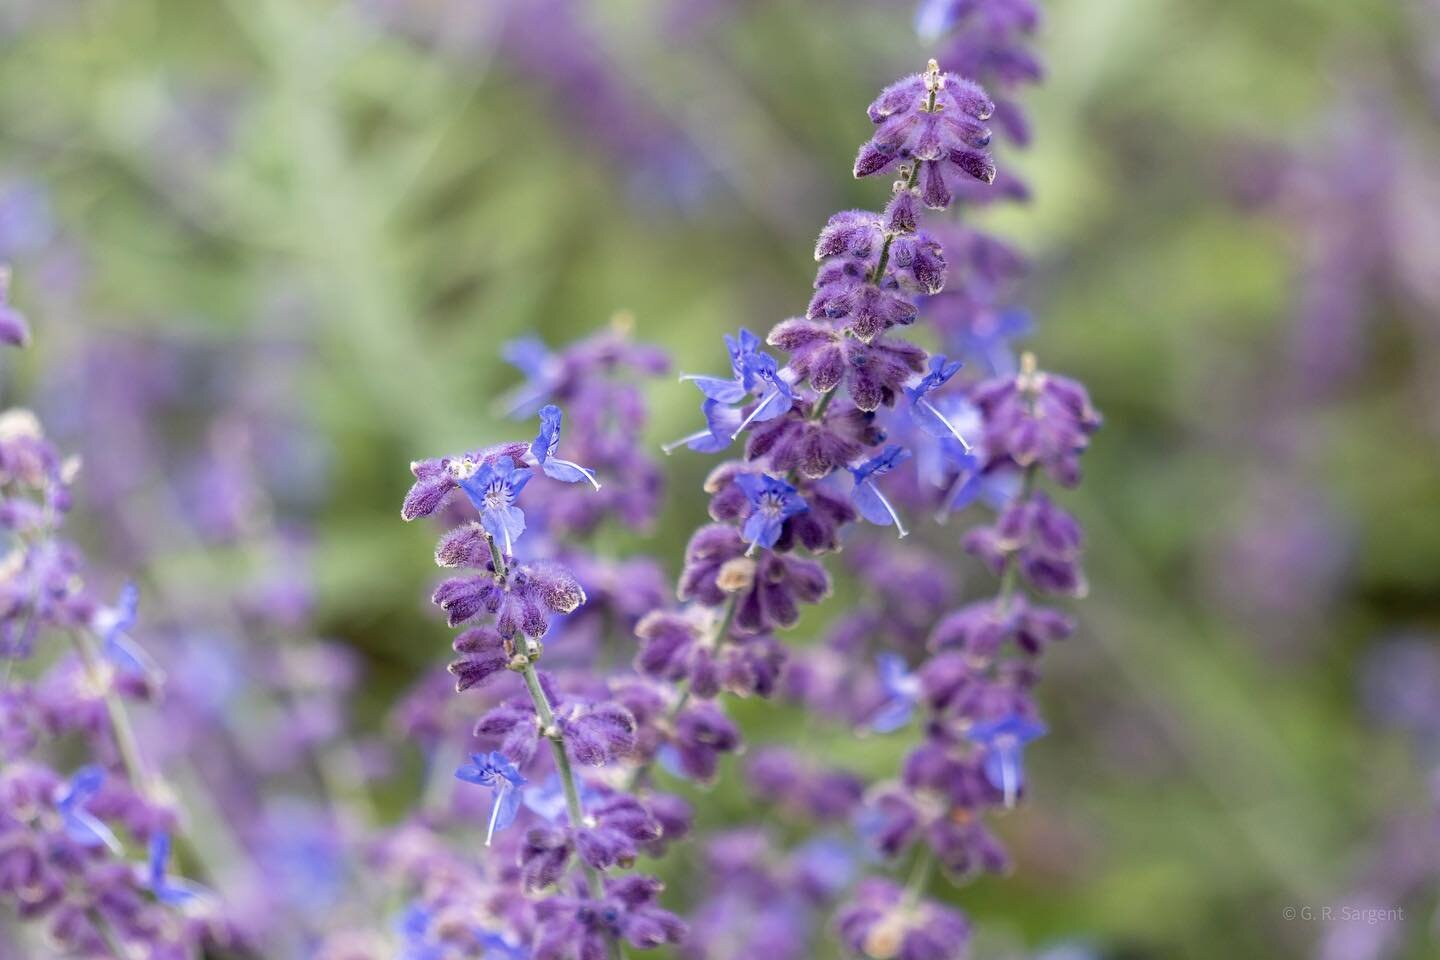 Russian Sage (Salvia Yangii)

Blue violet flowers emerge in panicles during summer through October. They thrive in full sun and are a great addition to gardens as they attract pollinators and have ornamental value. Similar to most sages, they are fra